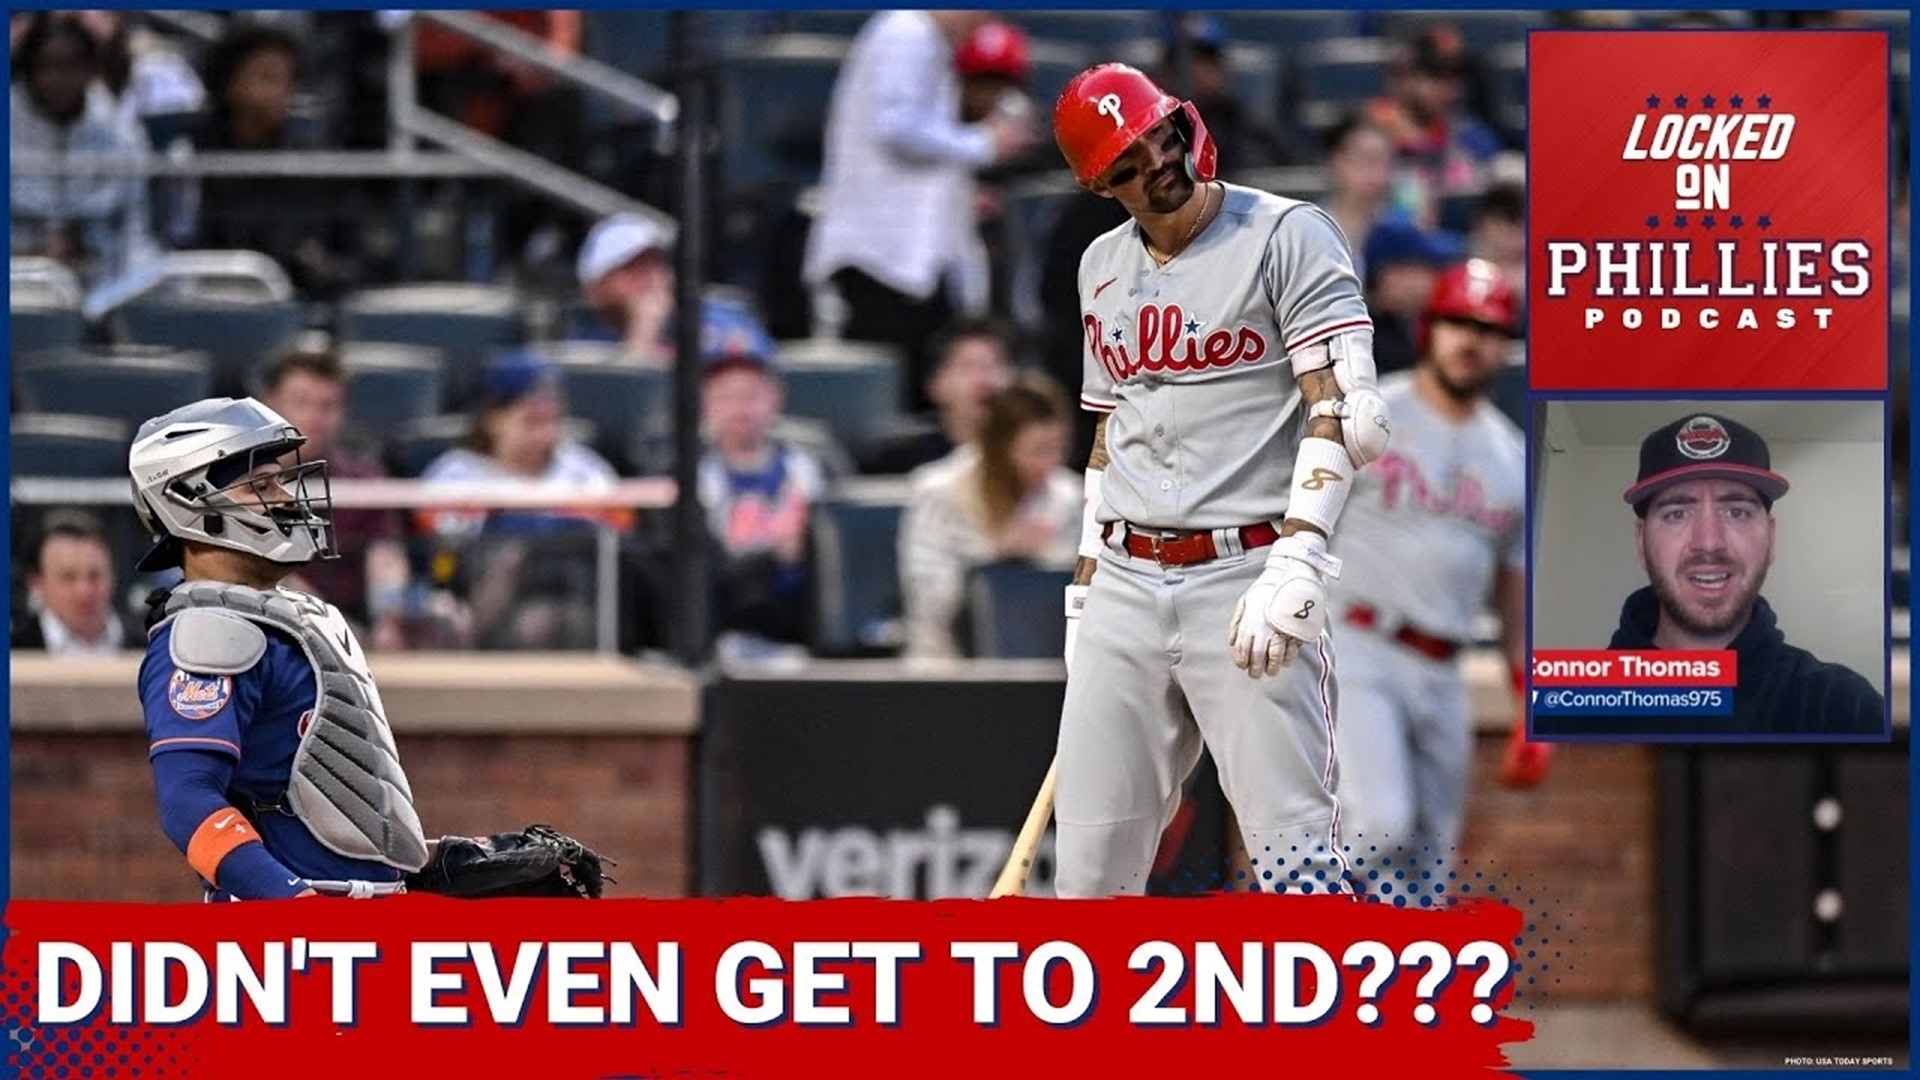 In today's episode, Connor discusses the Philadelphia Phillies' shutout loss to the New York Mets in a game that no Phillies batter even reached 2nd base.